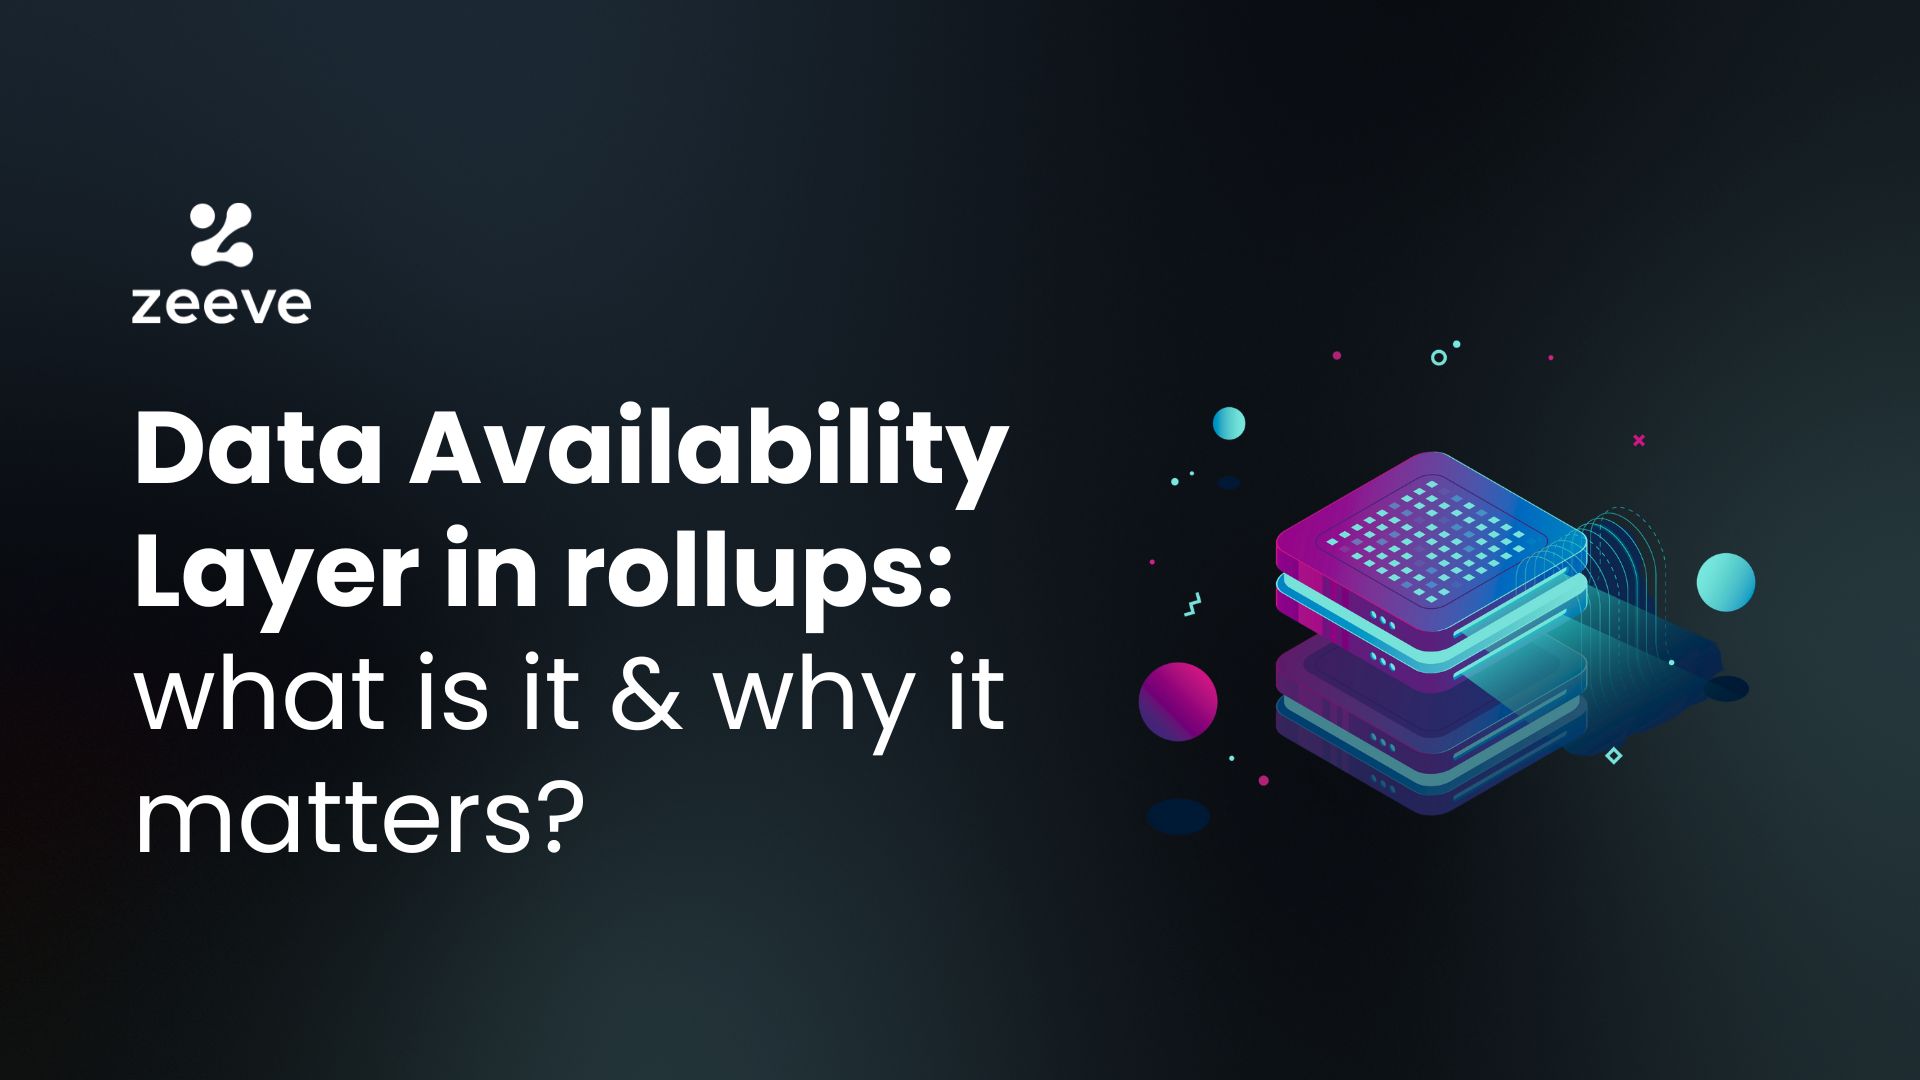 Data availability layers in rollups